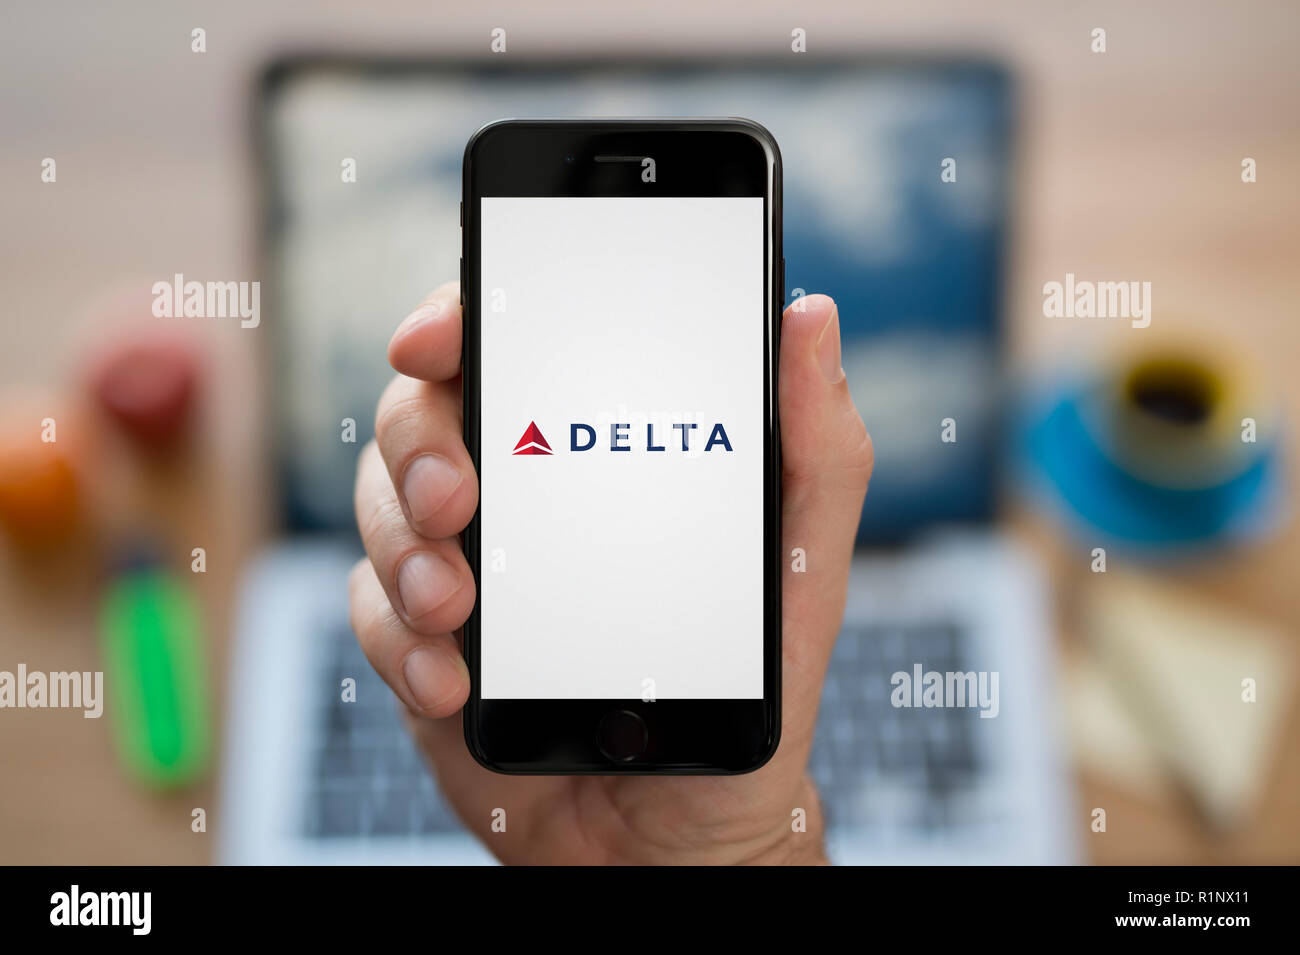 A man looks at his iPhone which displays the Delta Air Lines logo, while sat at his computer desk (Editorial use only). Stock Photo